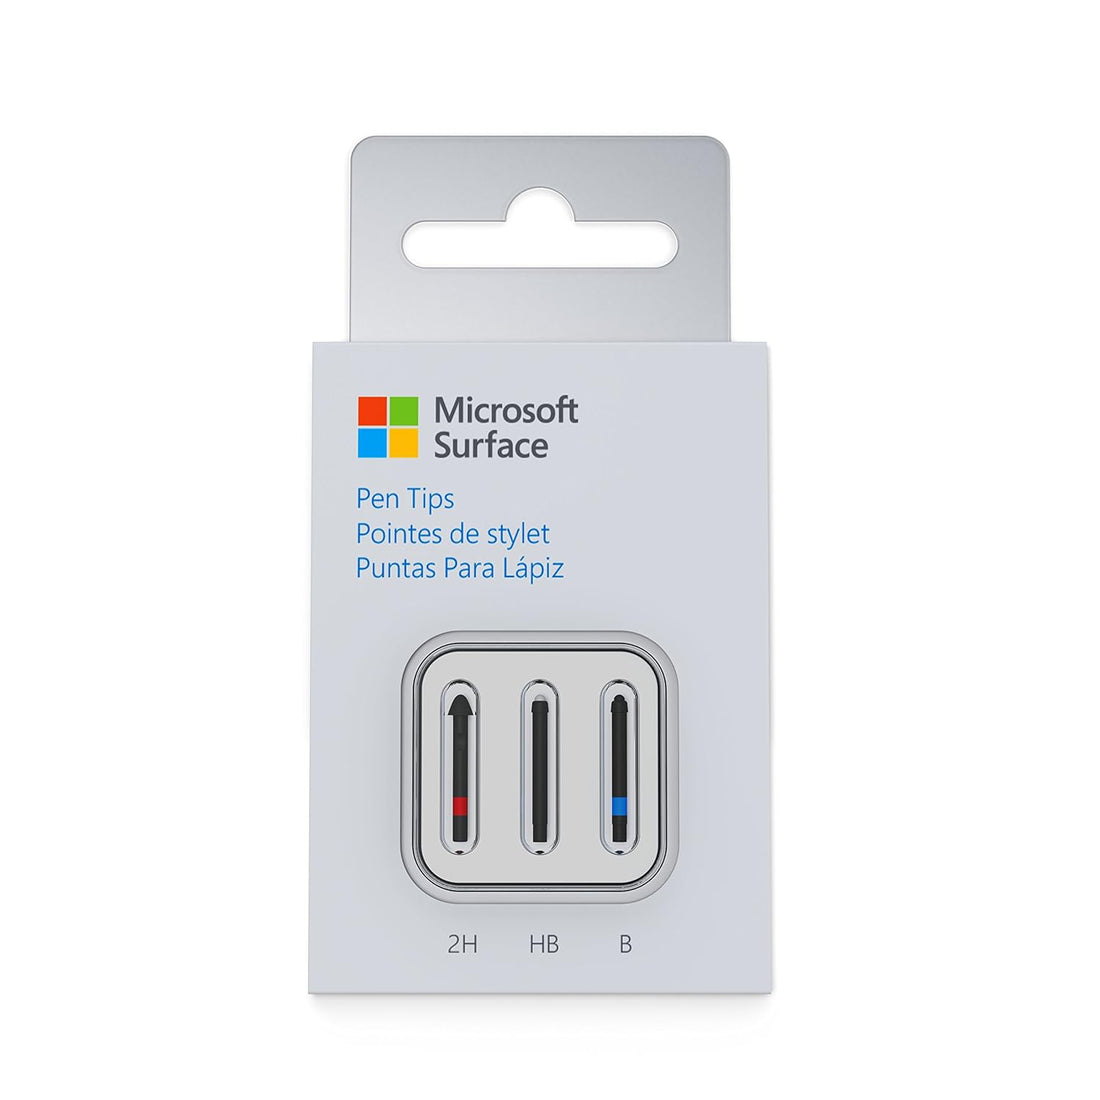 Microsoft Surface Pen Tip Kit (US Imported)